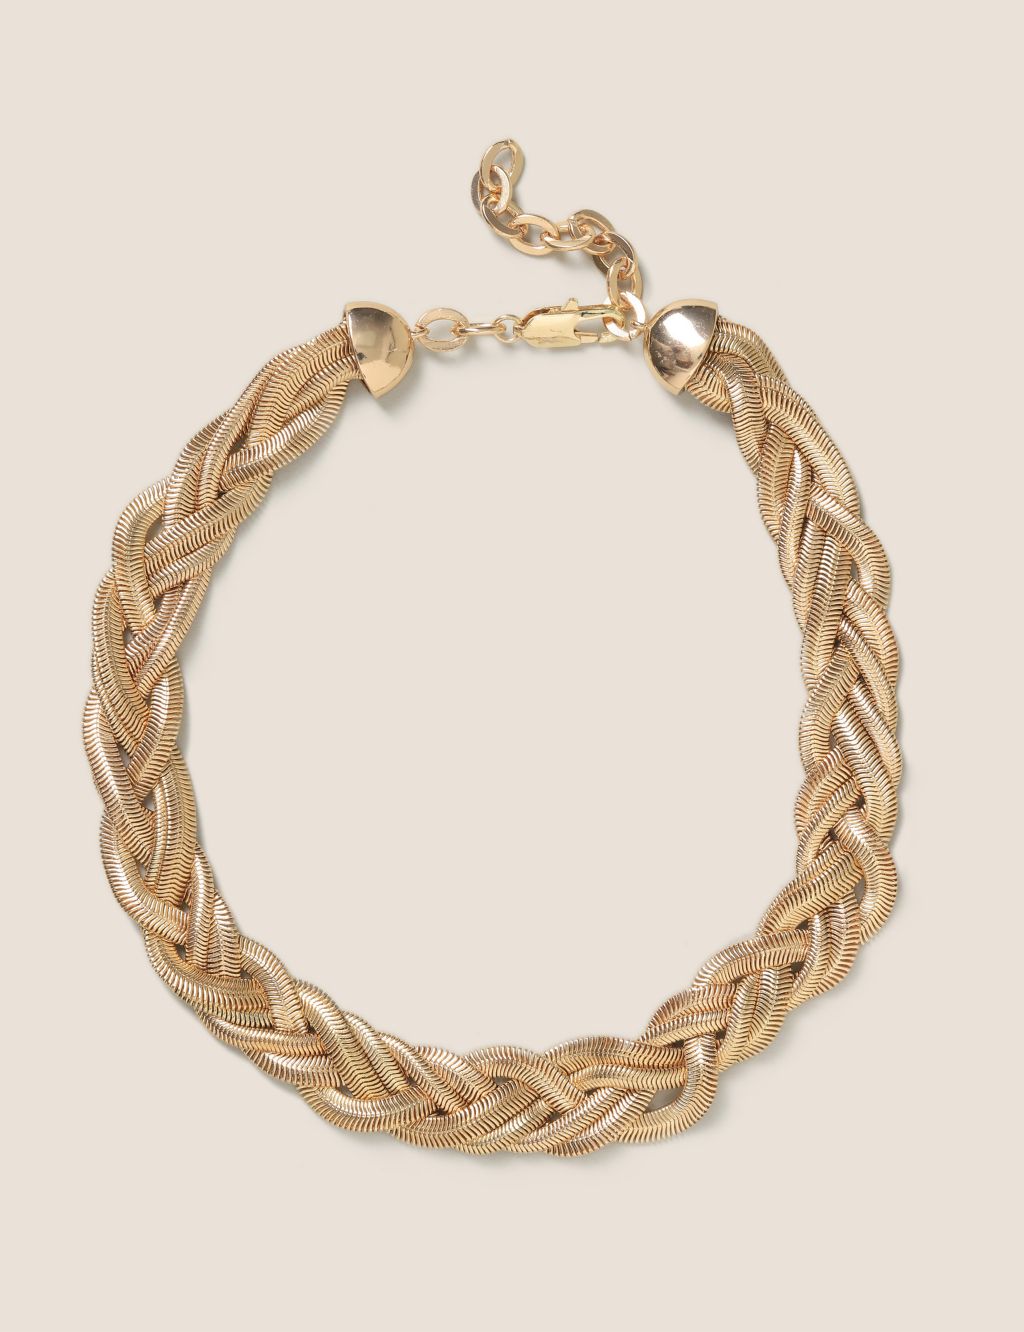 Gold Snake Chain Necklace image 1